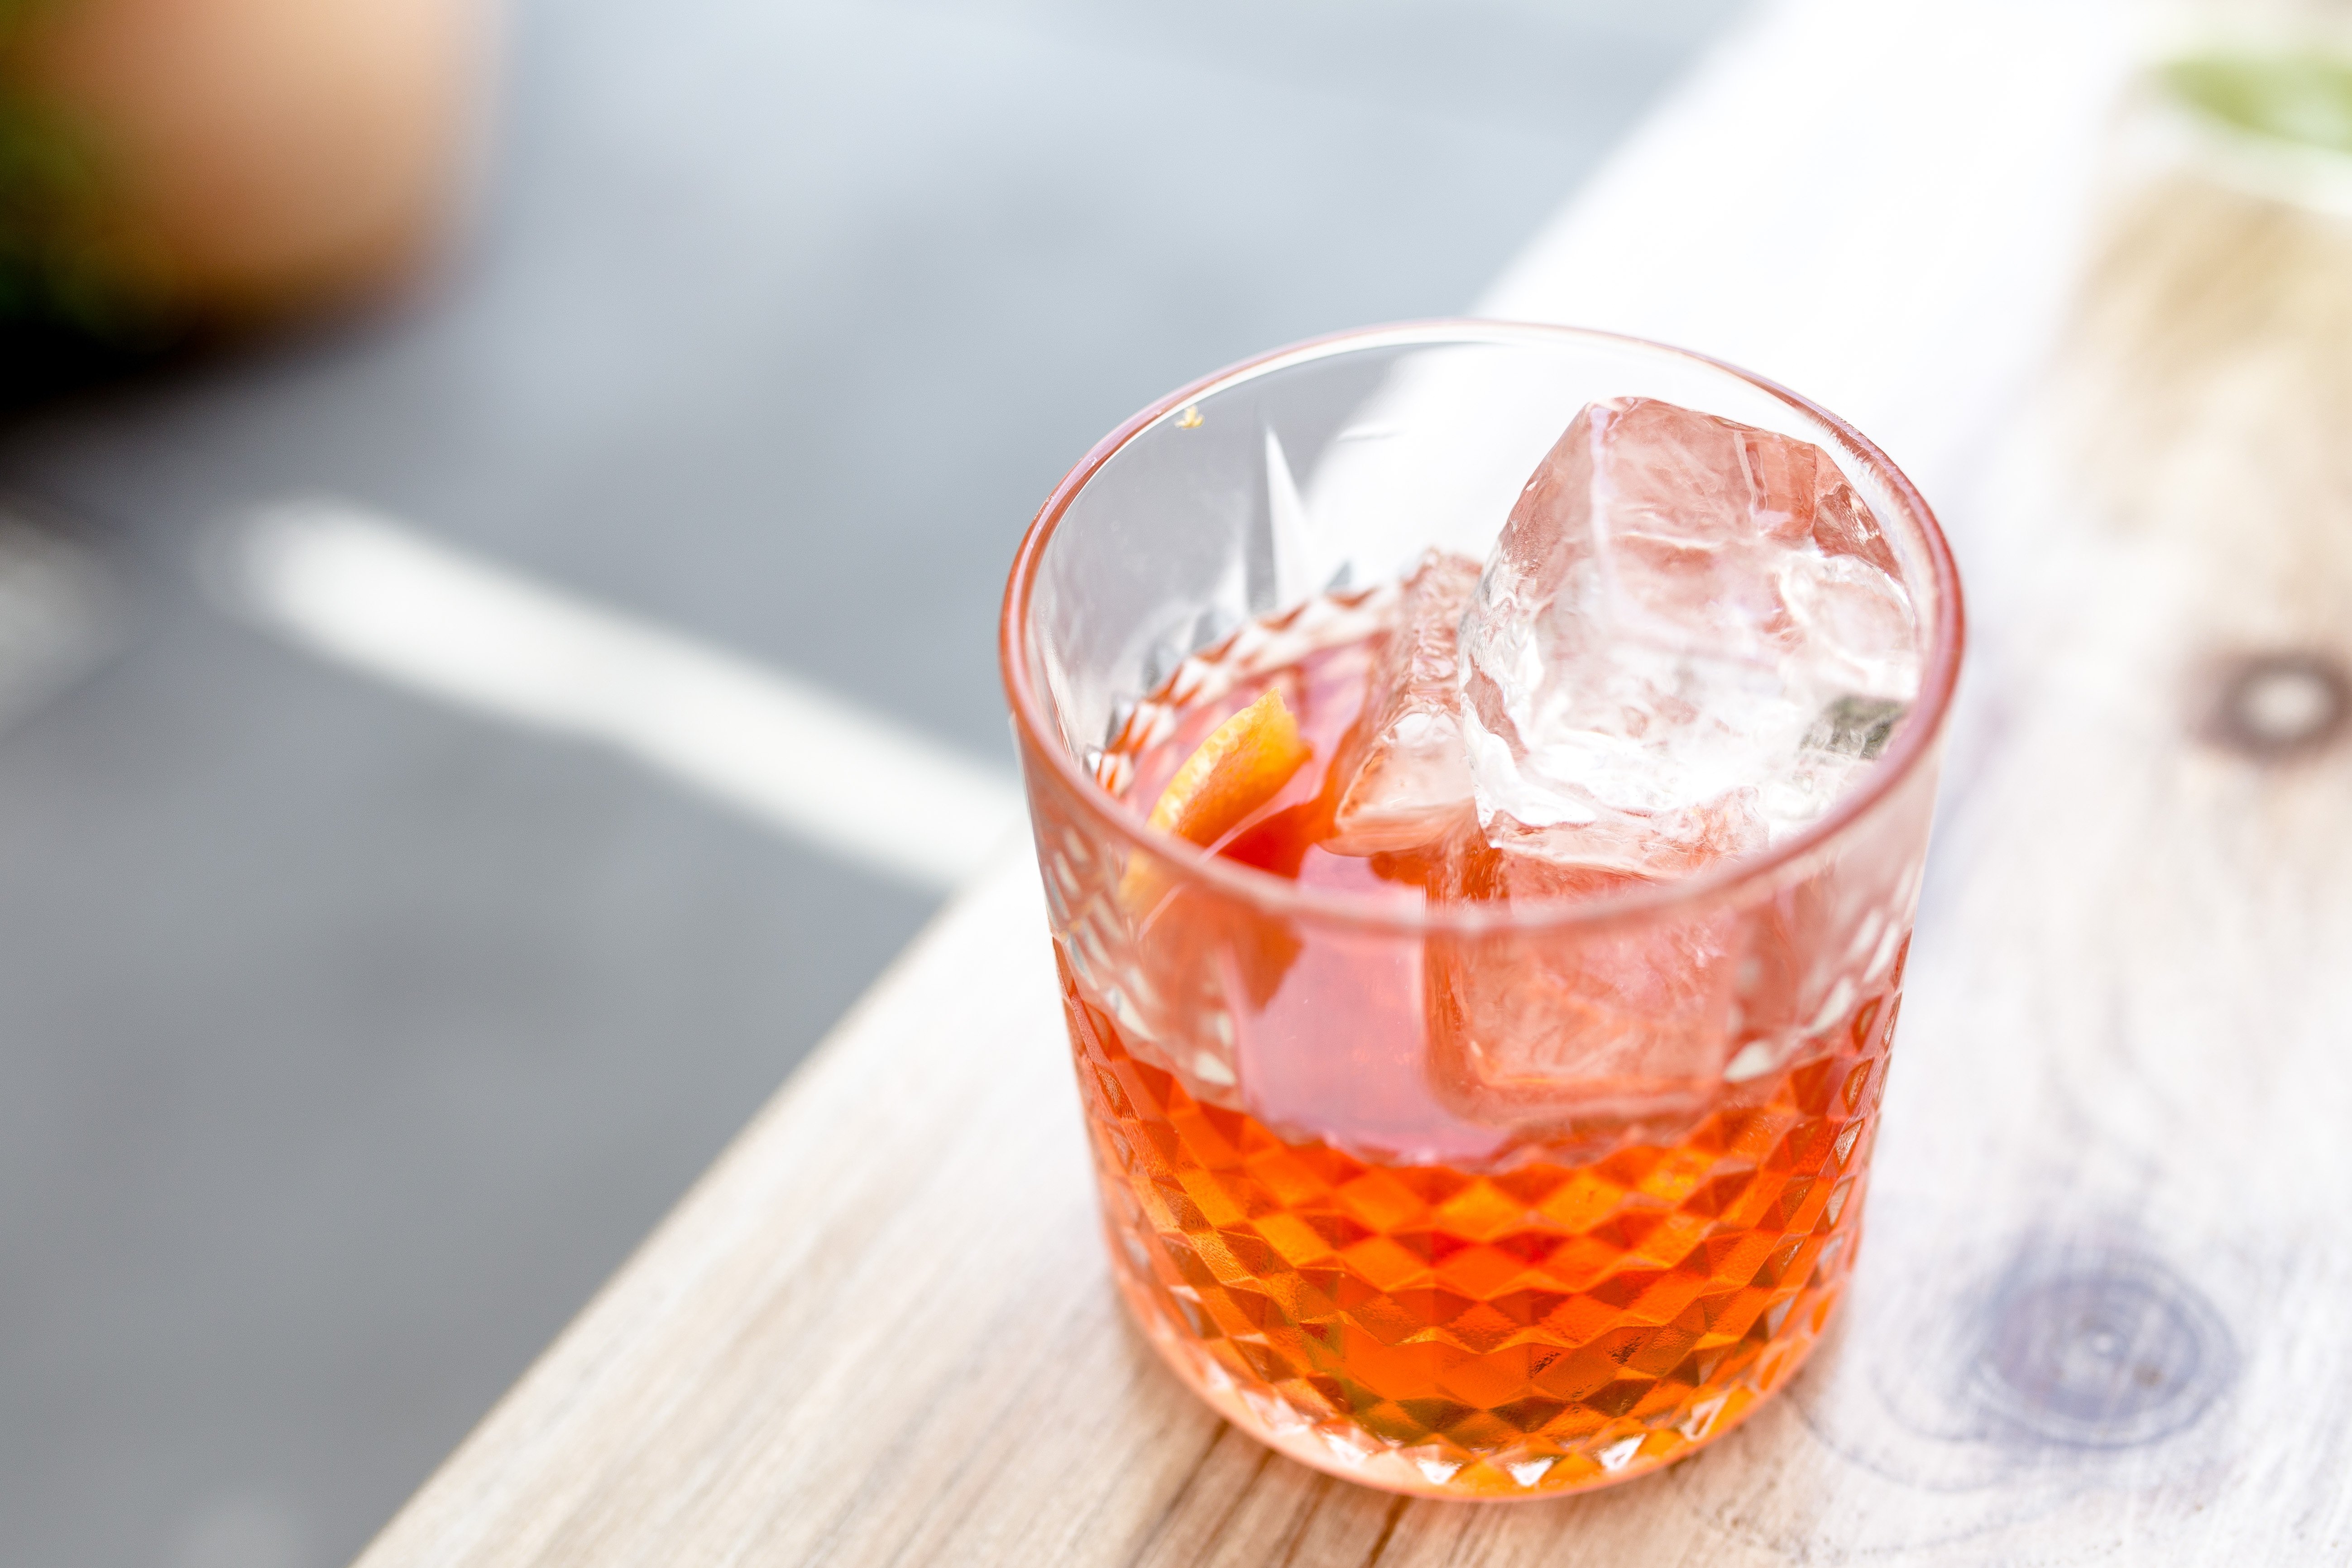 The old fashioned - an American classic